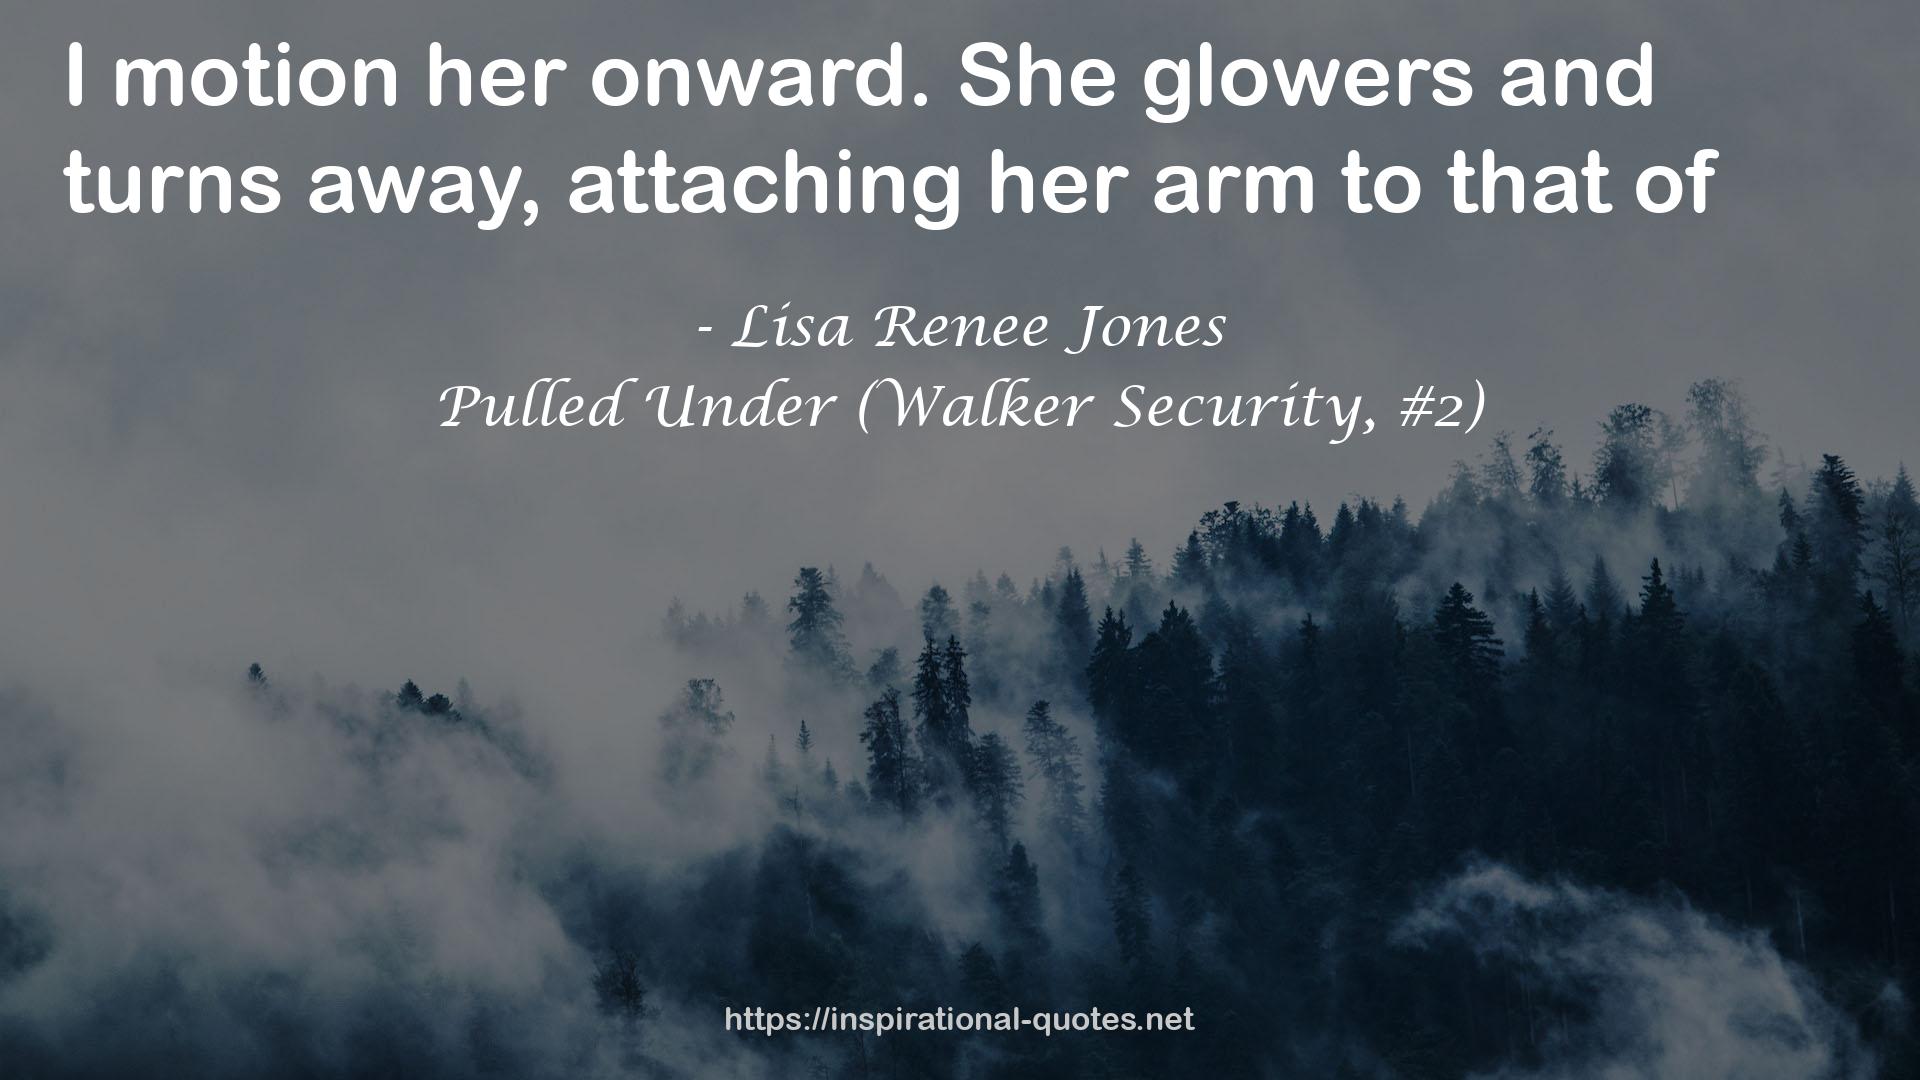 Pulled Under (Walker Security, #2) QUOTES